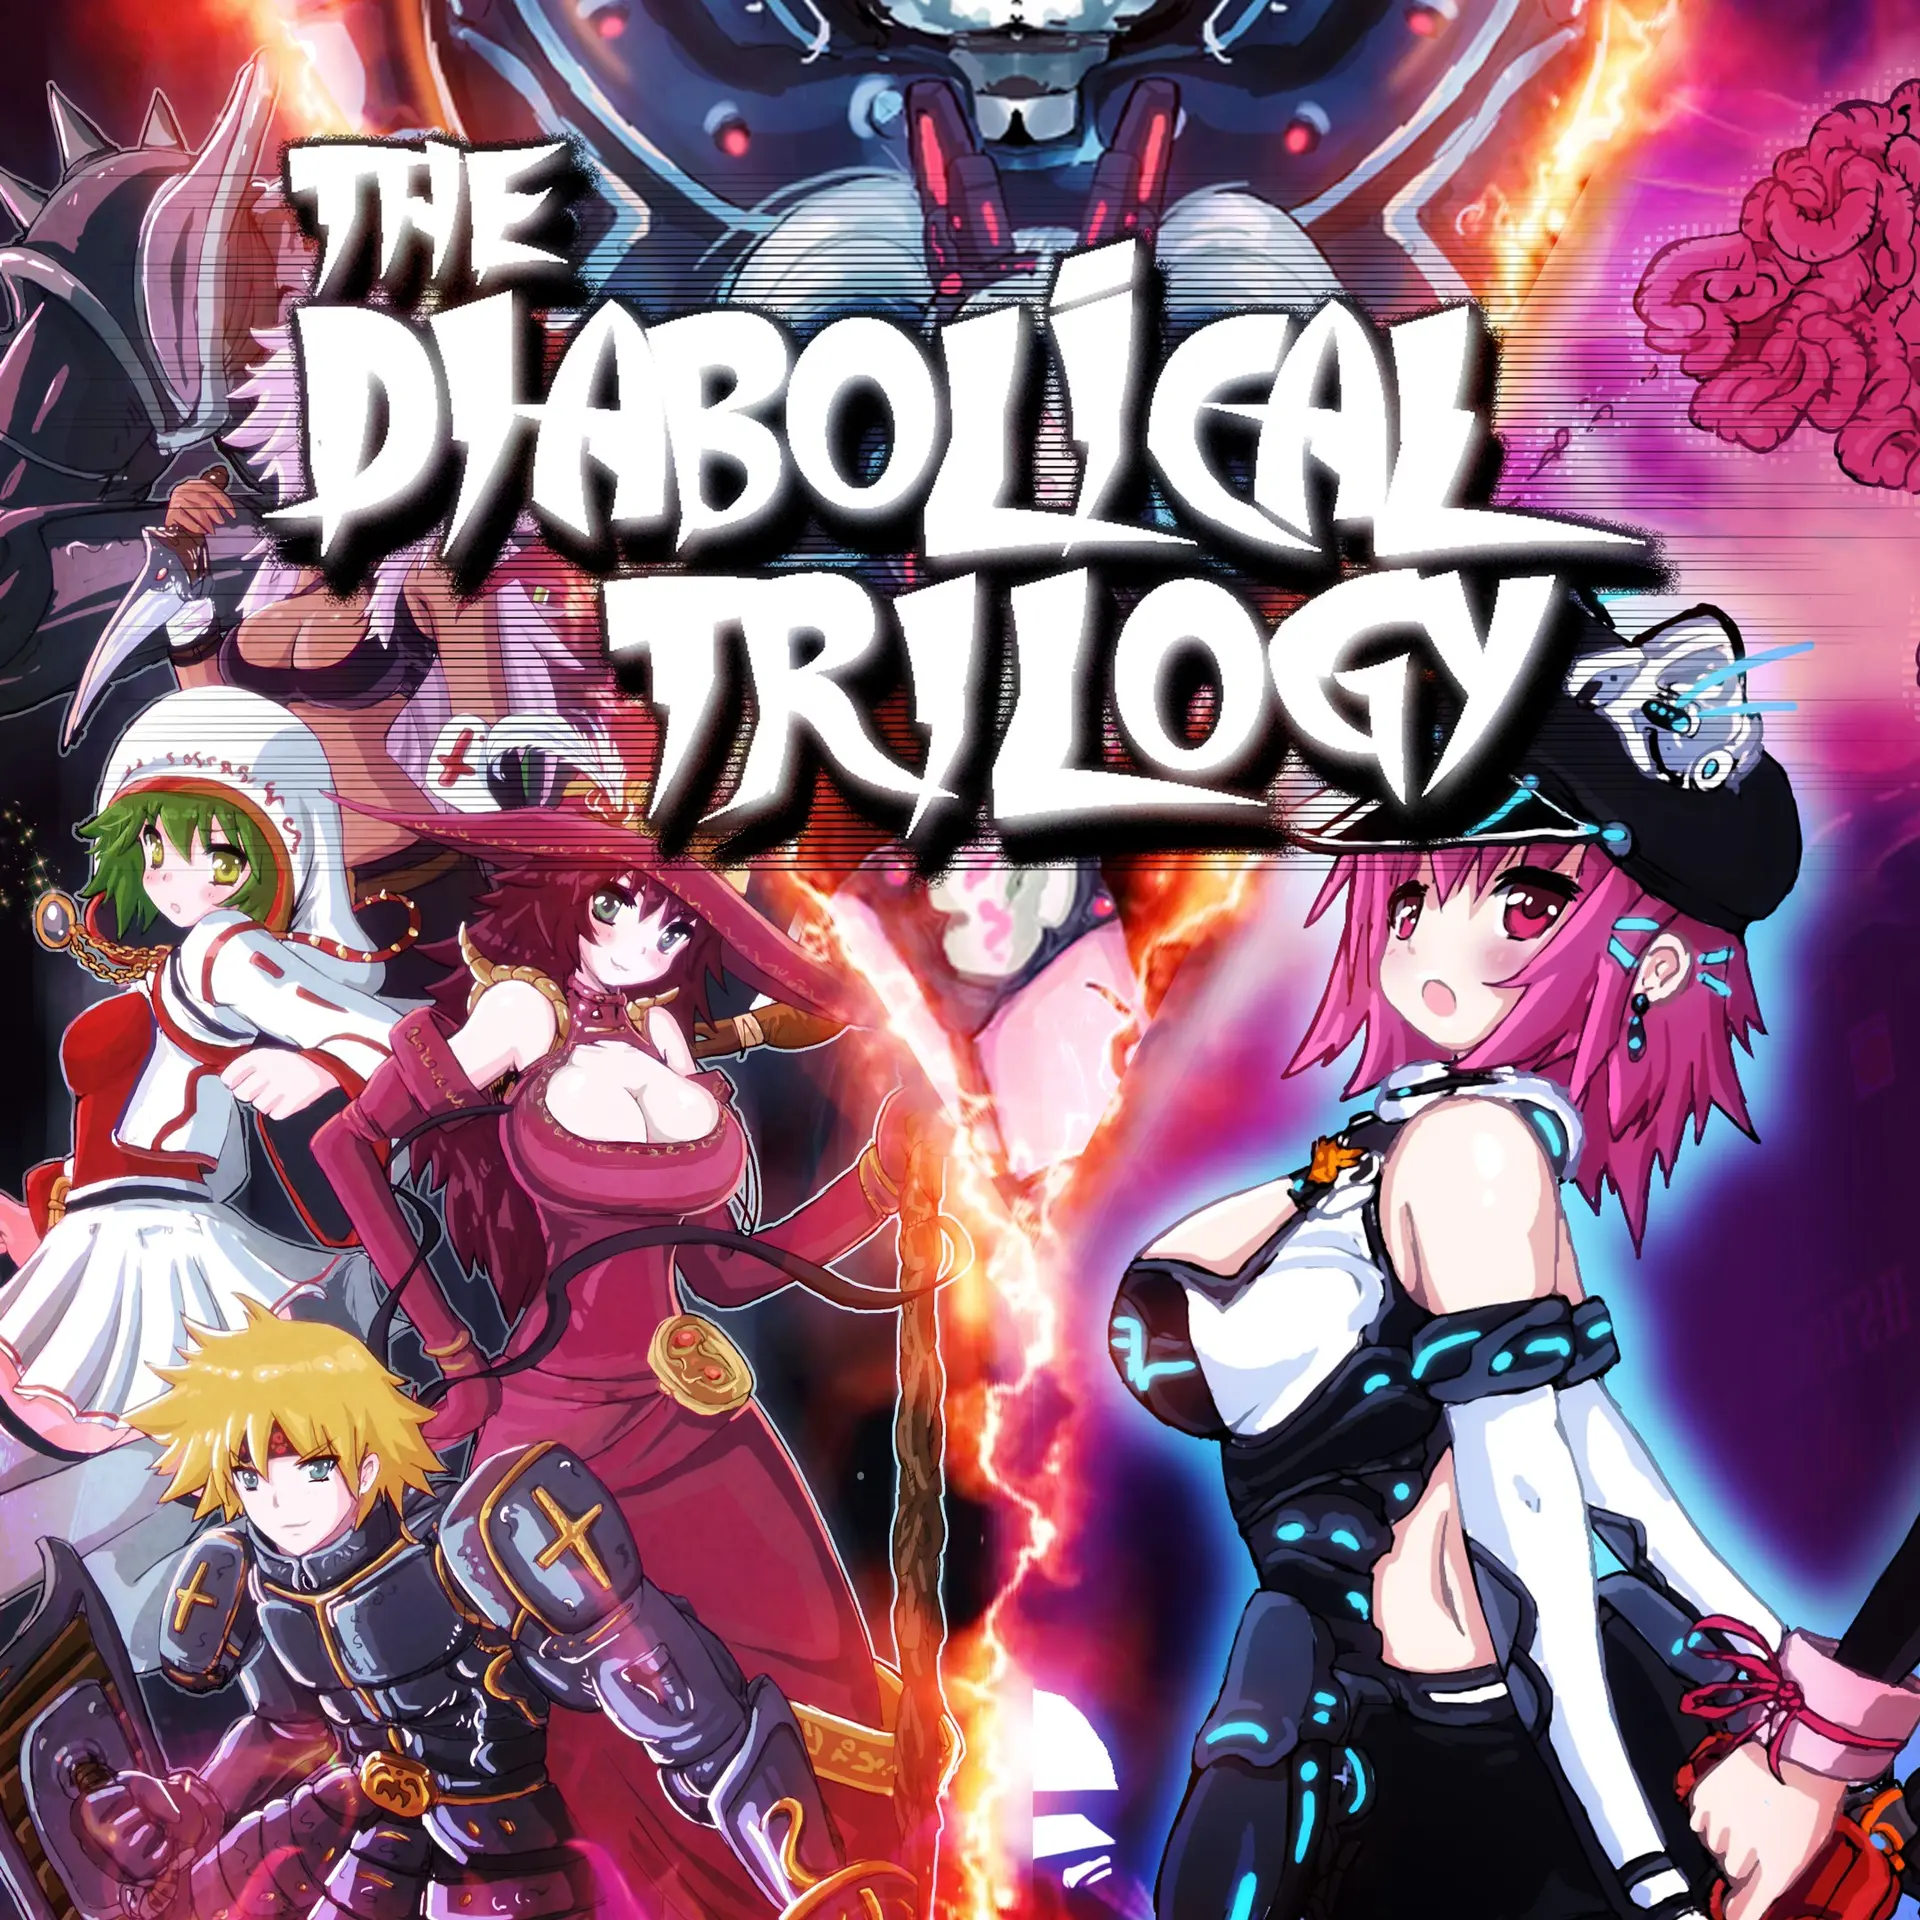 The Diabolical Trilogy (XBOX One - Cheapest Store)